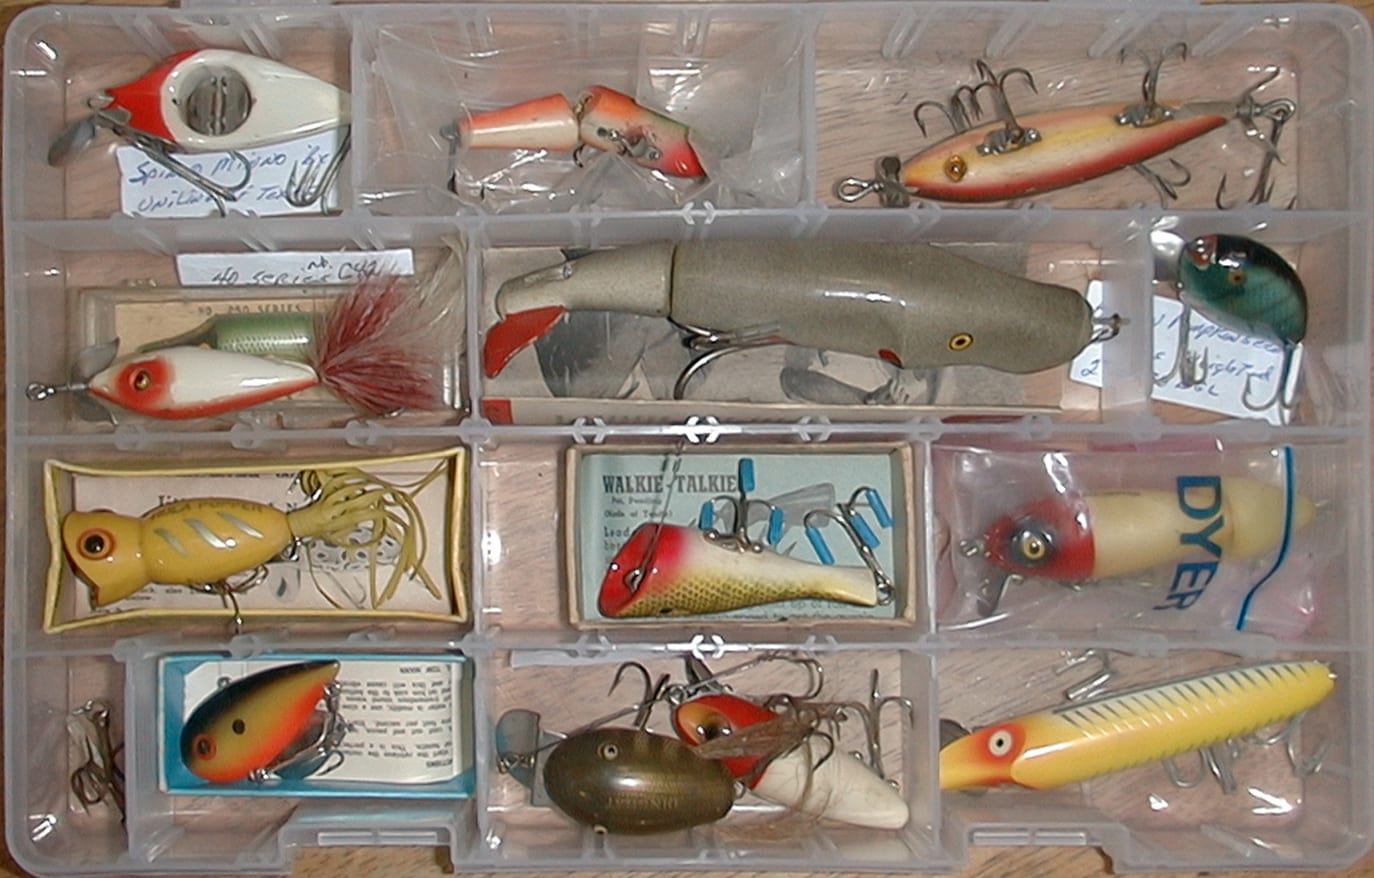 Image Detail for - old antique fishing lures, heddon, creek chub, pflueger, paw  paw, fly